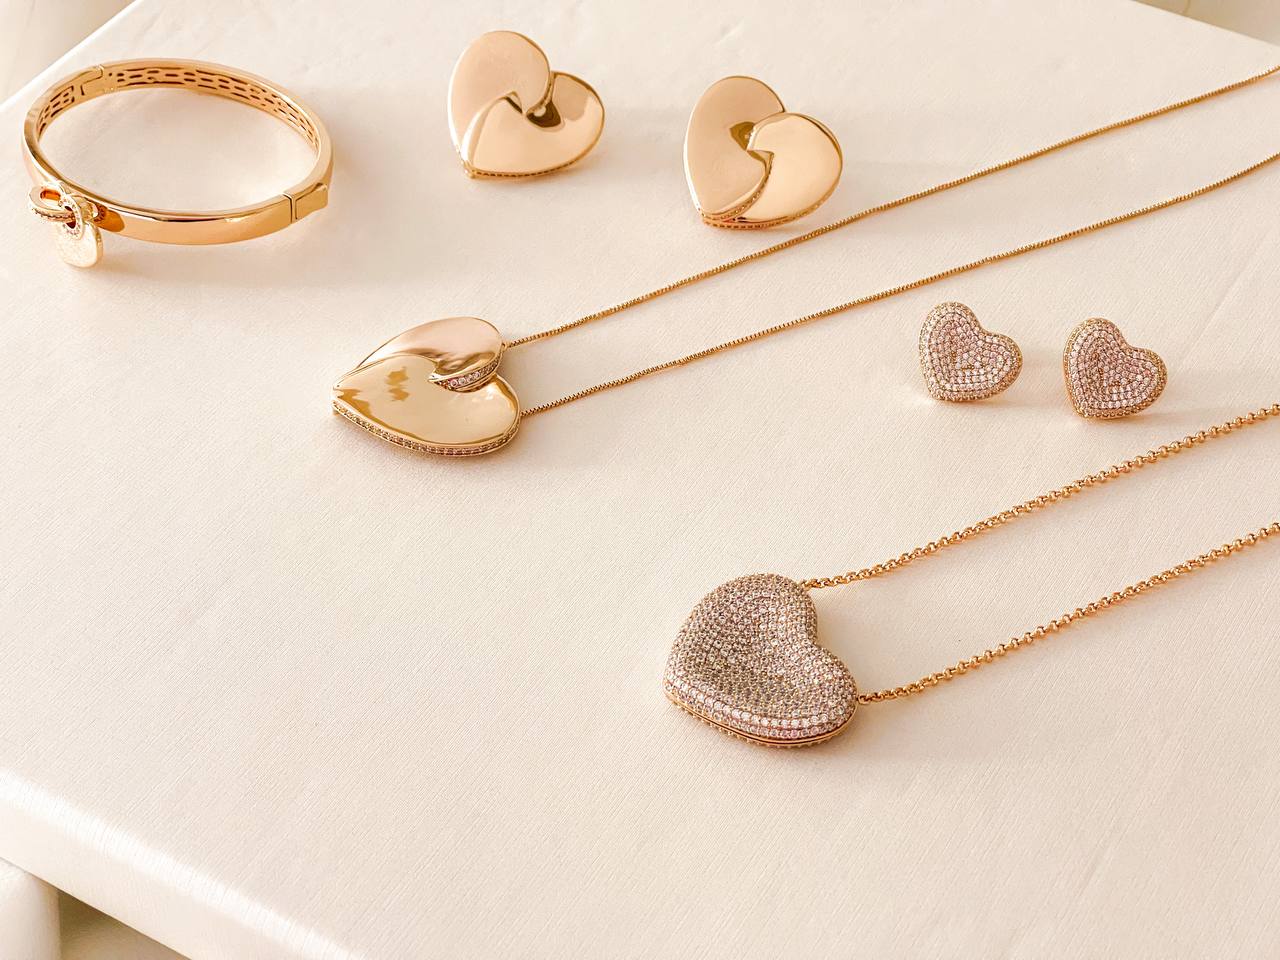 Maxi Heart Shaped Necklace Earring Set